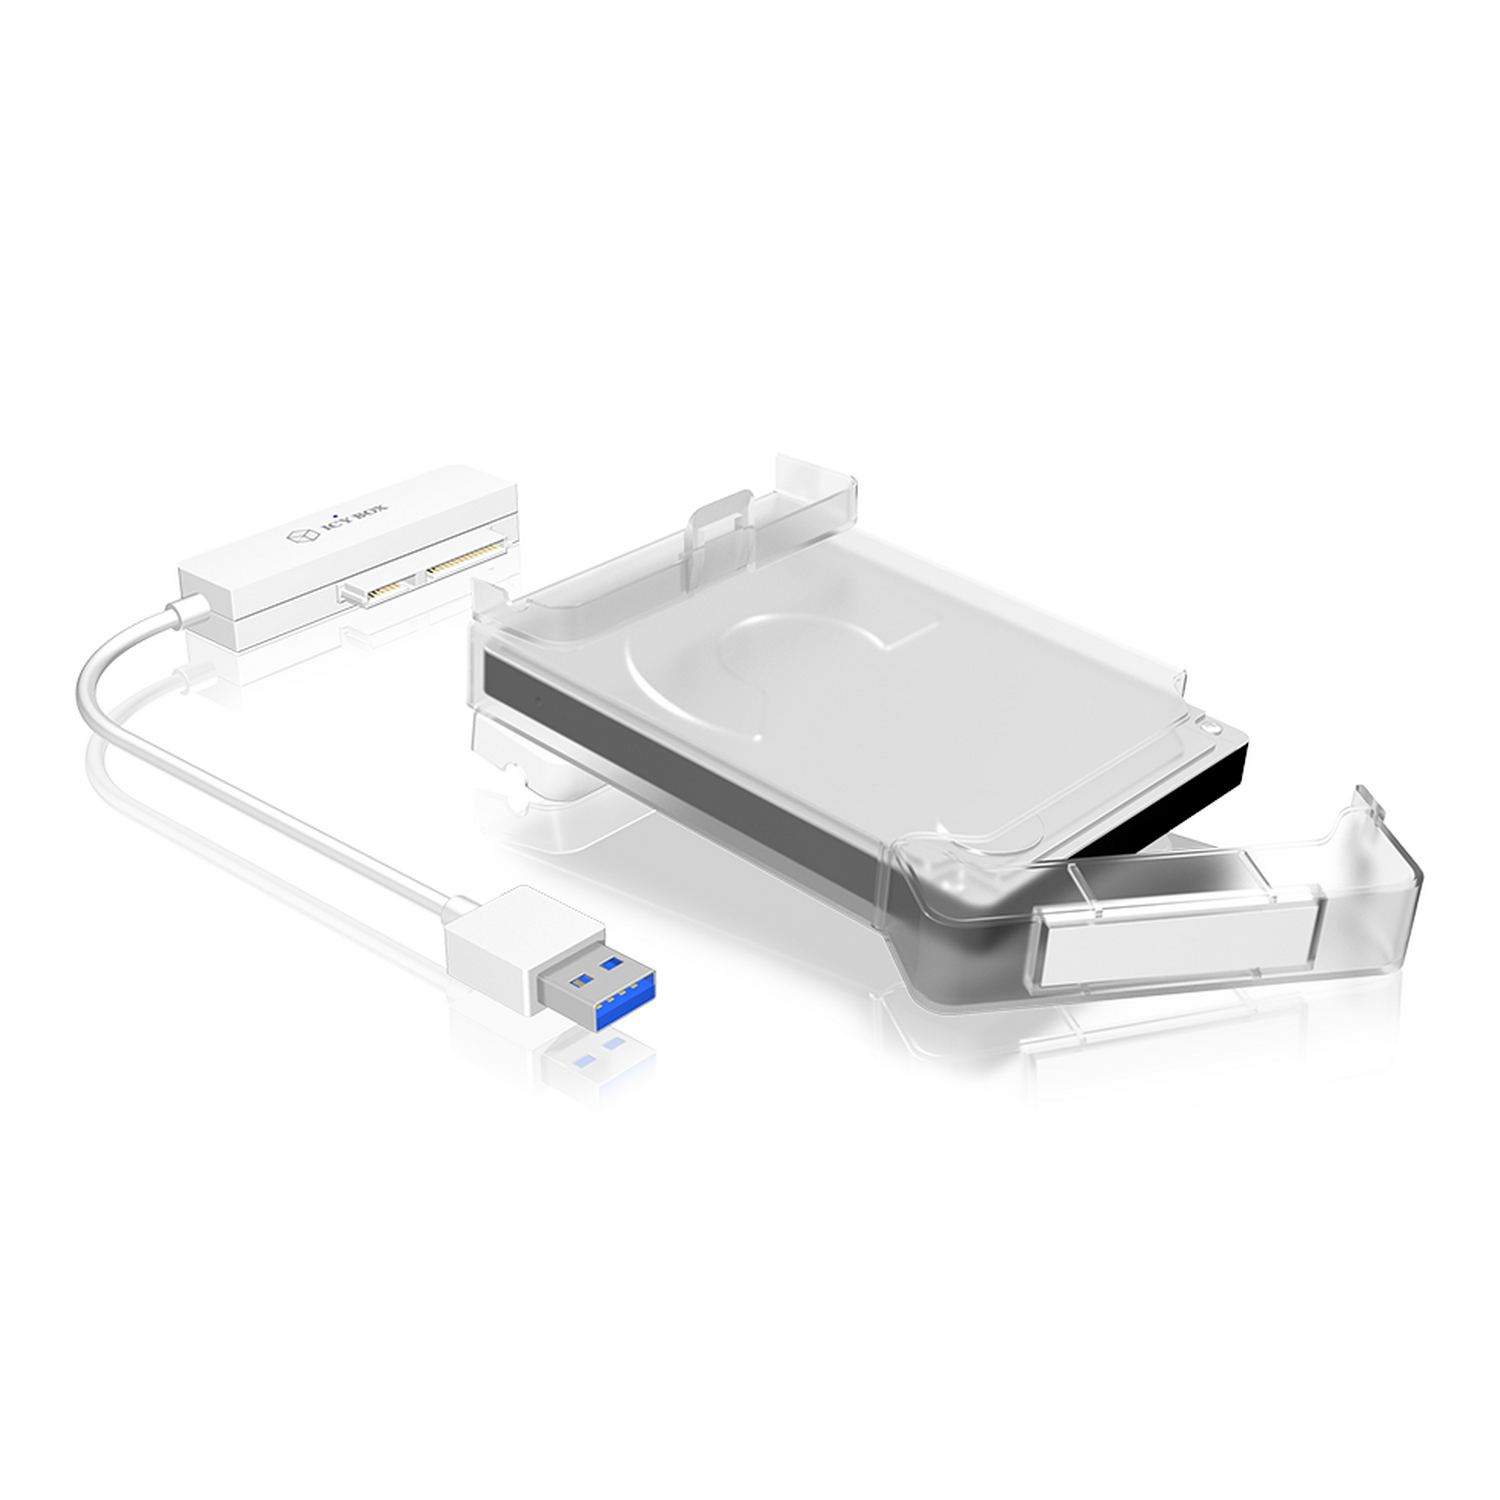 ICY BOX - IcyBox Adapter cable for 2.5" SATA HDDs and SSDs USB 3.0 with Enclosure